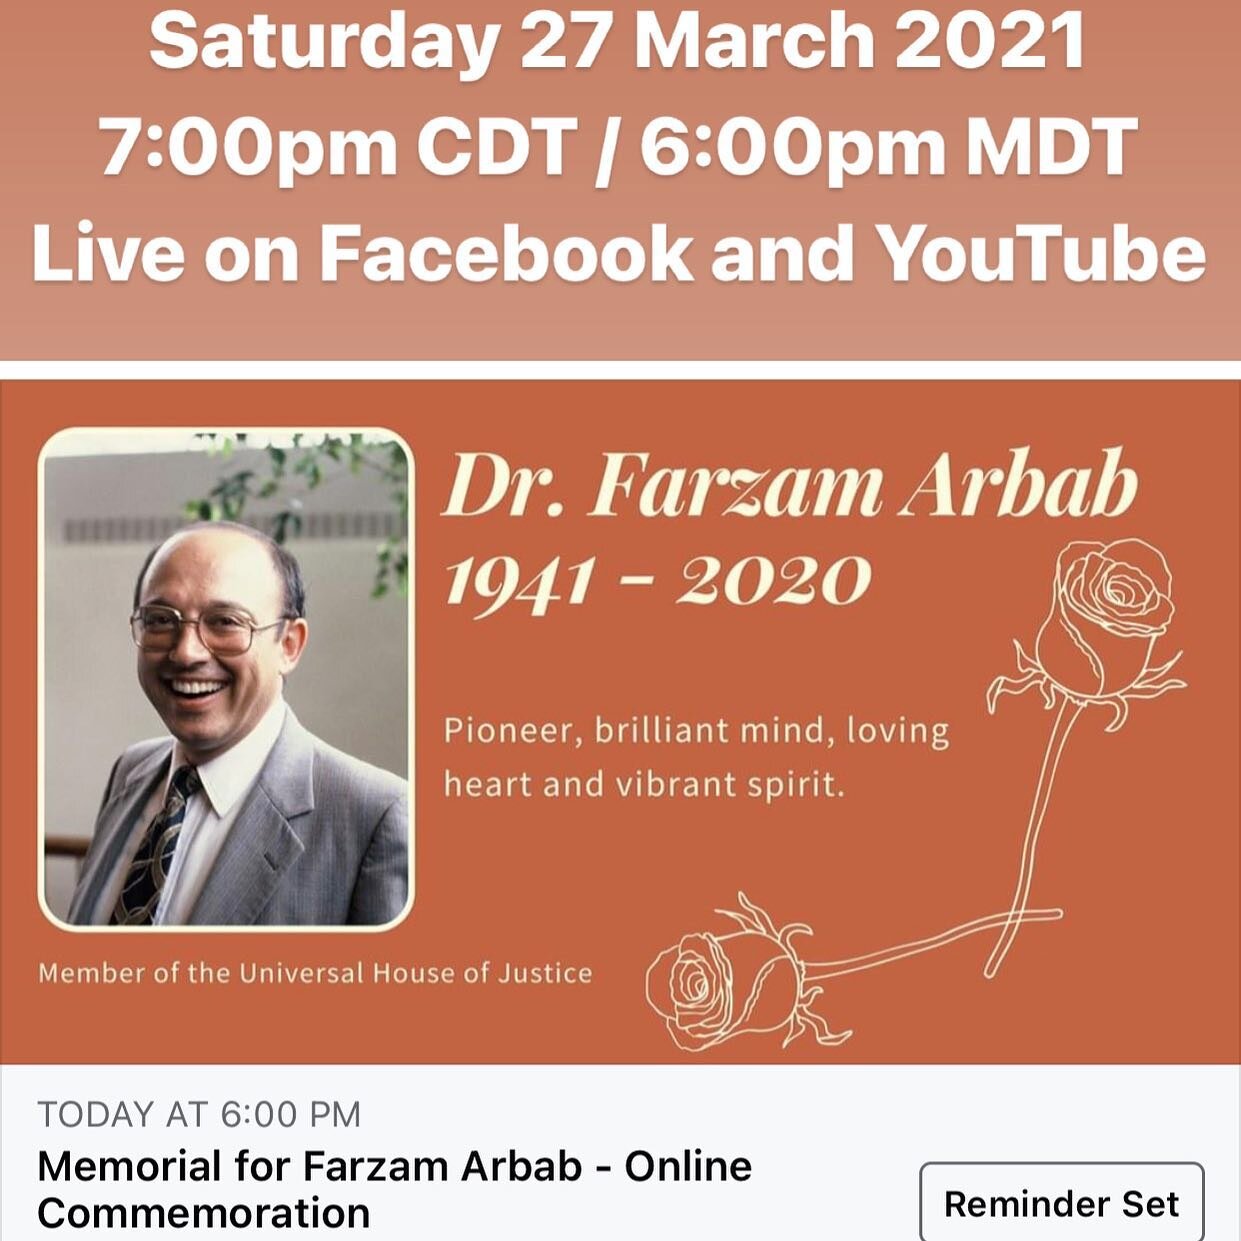 Virtual memorial service in honor of Dr. Farzam Arbab begins at 6:00pm MDT this evening, viewable at:
youtube.com/c/usbahaifaith or
facebook.com/BahaiTempleNorthAmerica

Farzam Arbab, a beloved former member of the Universal House of Justice, passed 